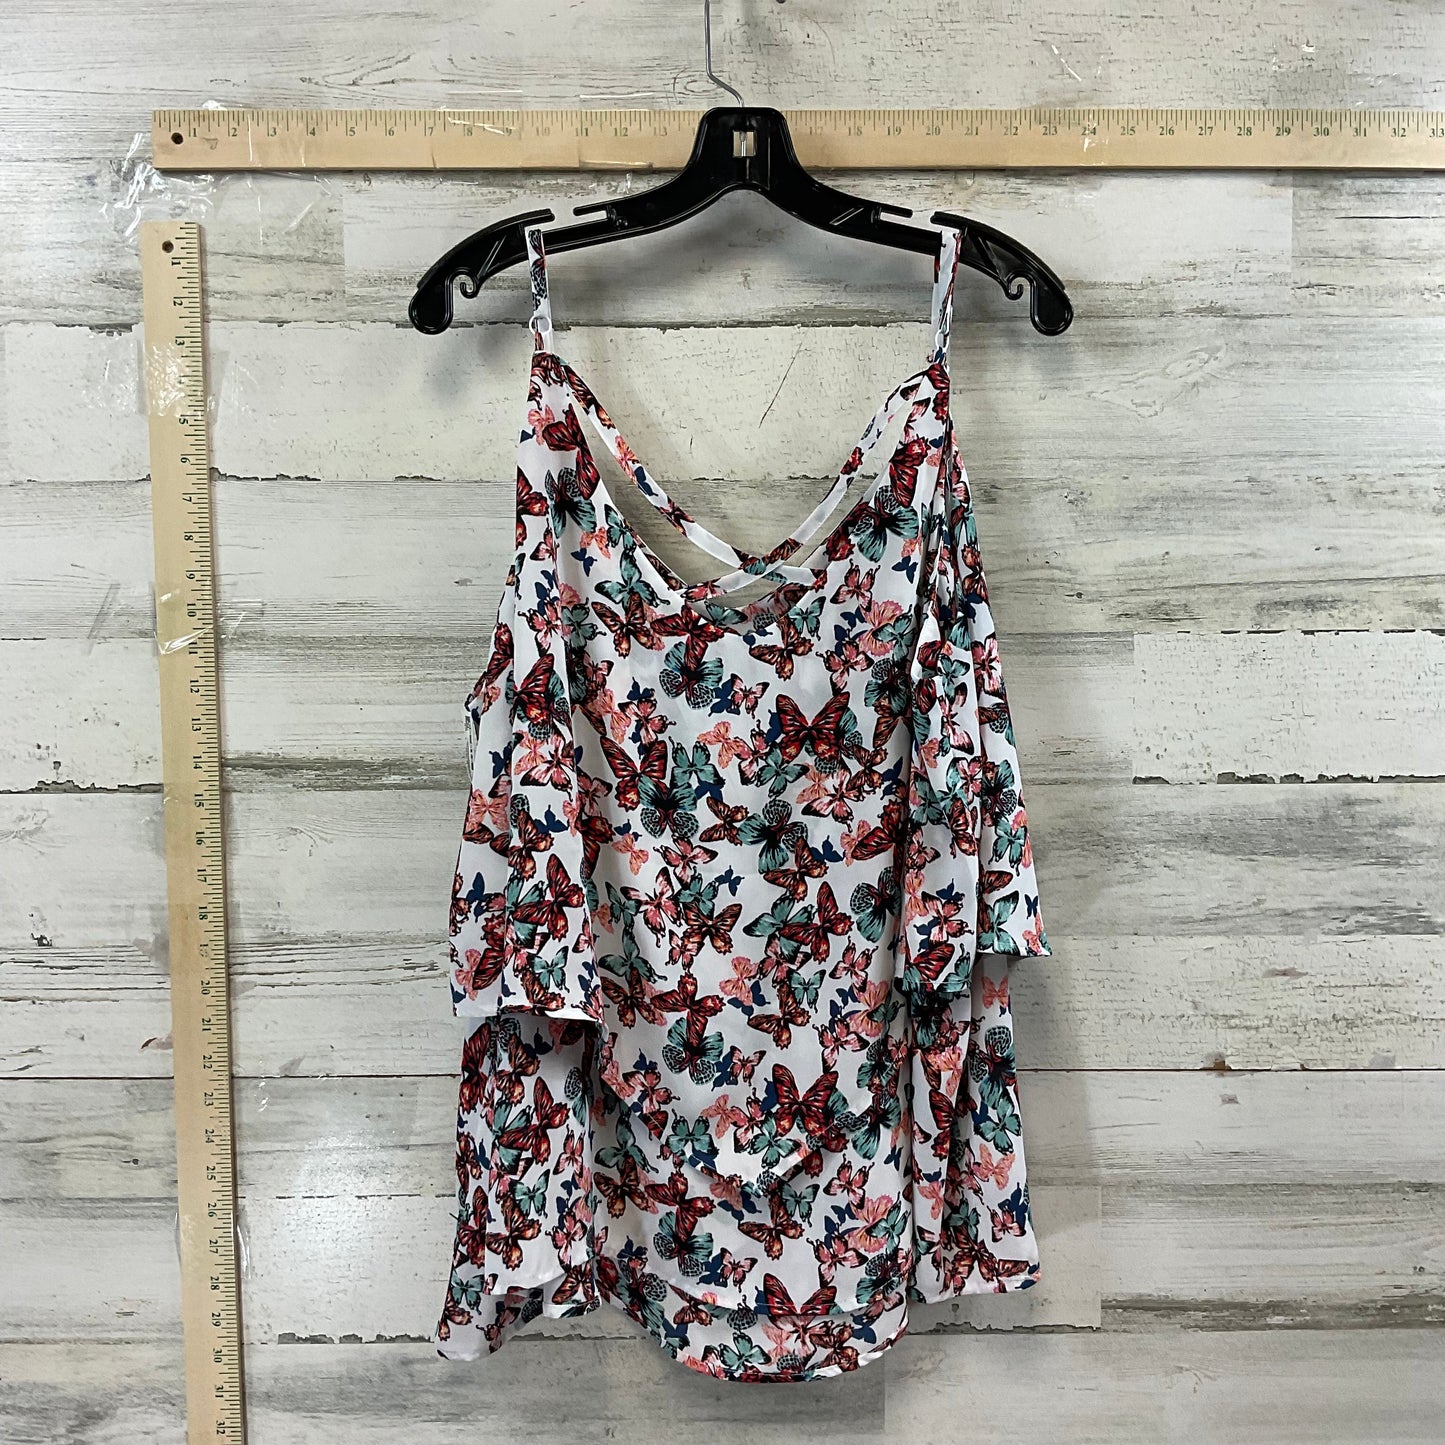 Top Sleeveless By Torrid  Size: 3x